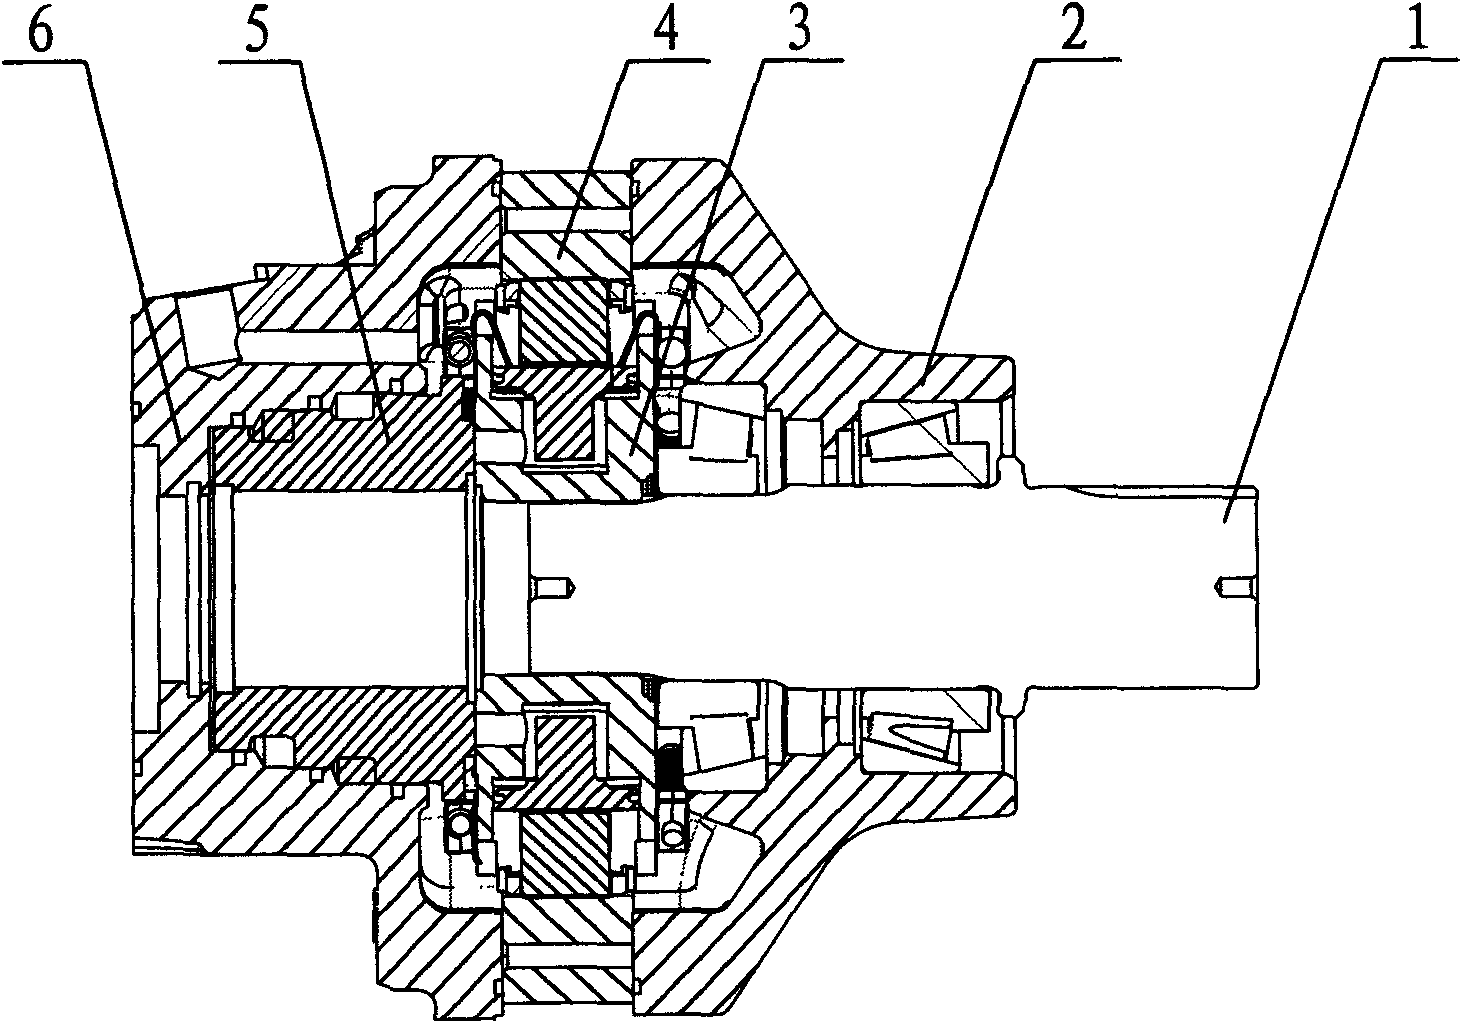 Plunger hydraulic motor with automatical initiative input and driven state switchover